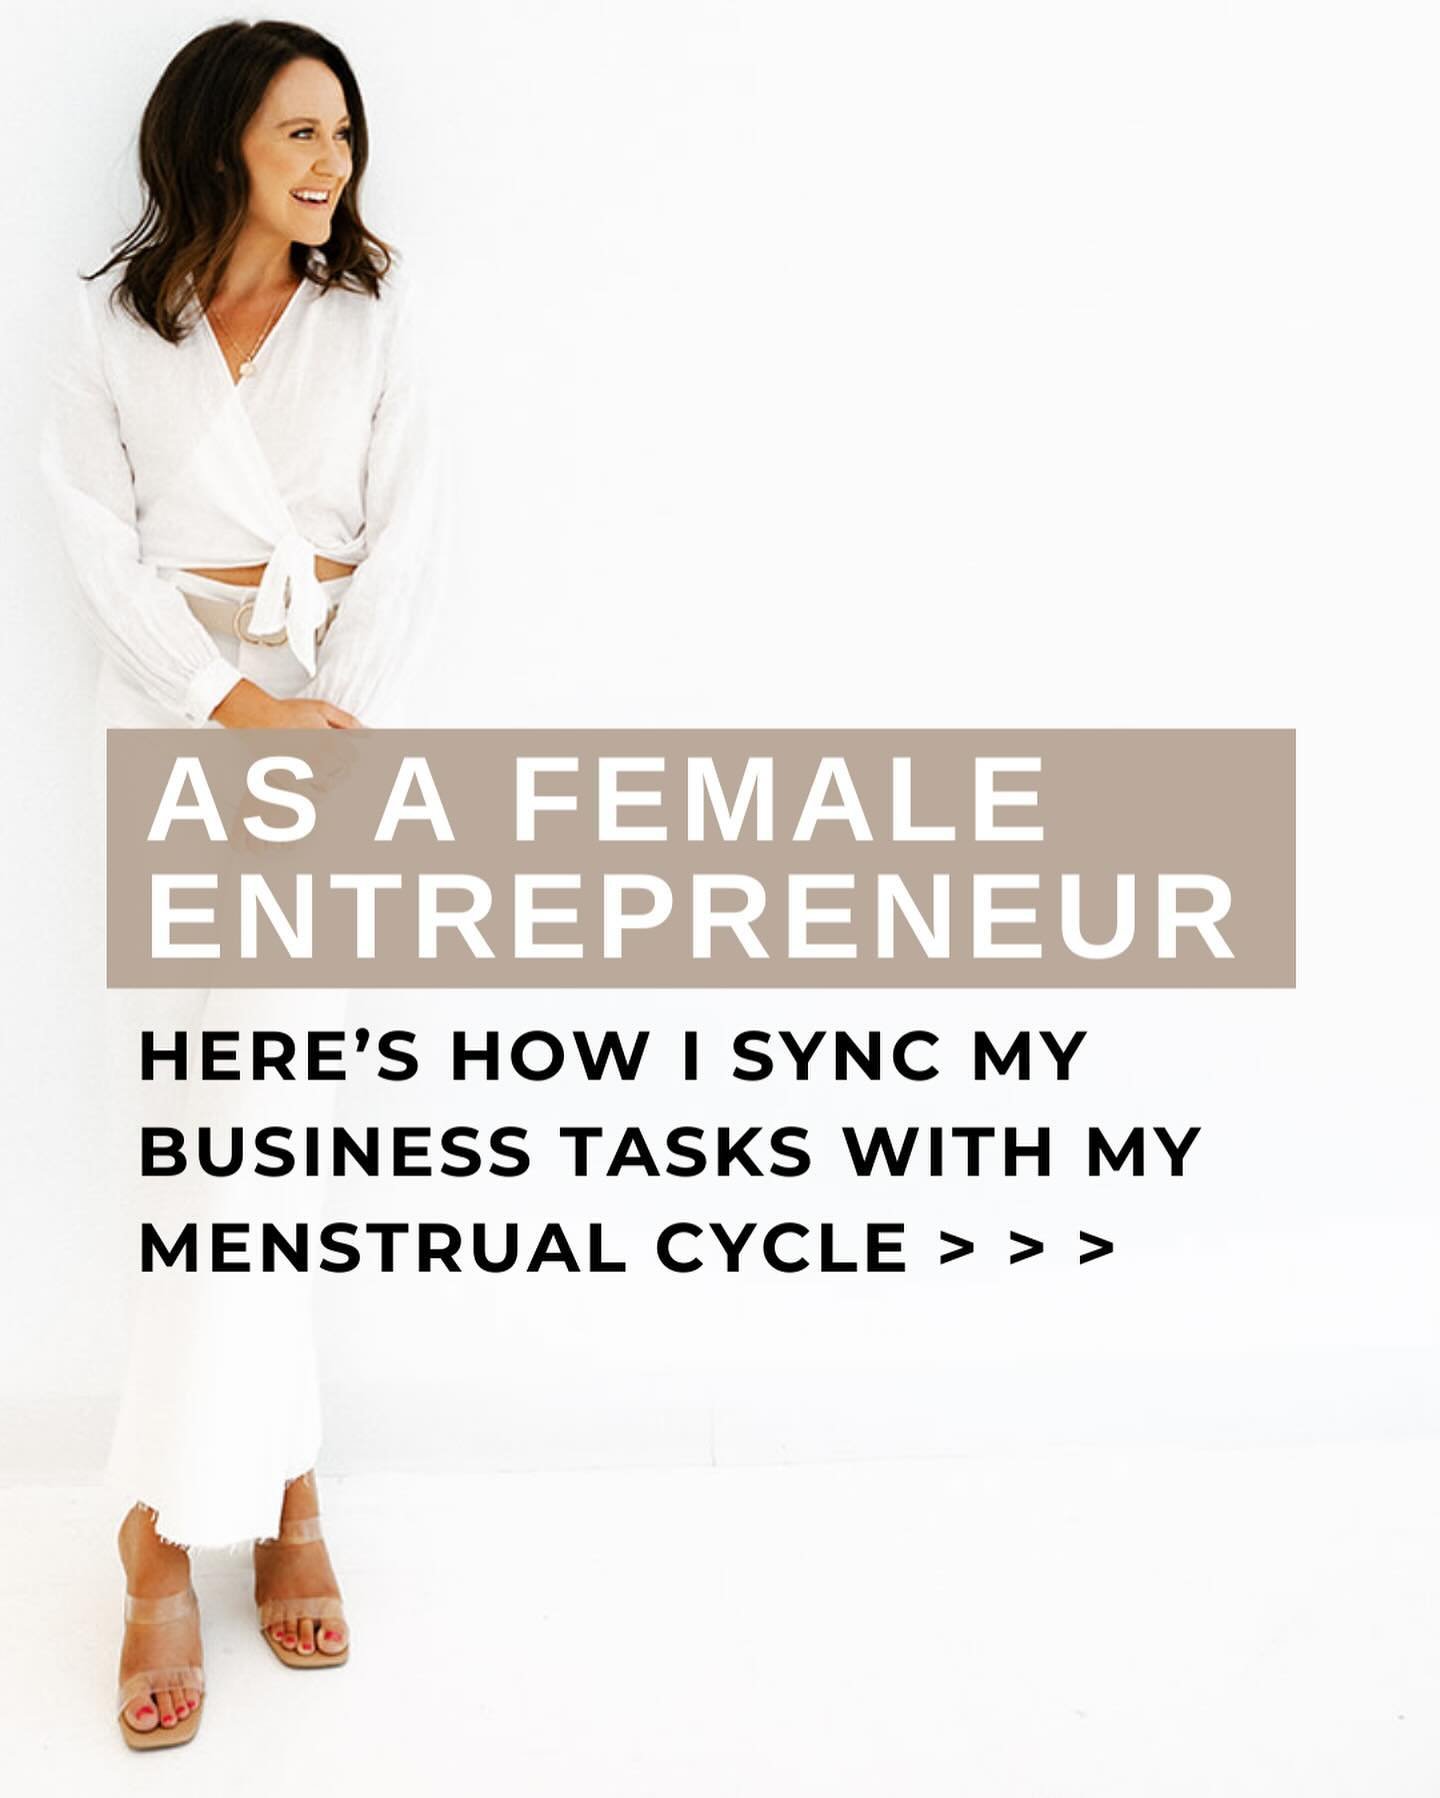 Comment &ldquo;HH&rdquo; to get my FREE Hormonal Harmony Guide - a beginner&rsquo;s guide to optimal well-being through menstrual cycle awareness and cycle syncing

We&rsquo;ve been told to believe that our menstrual cycle is a curse and we just have